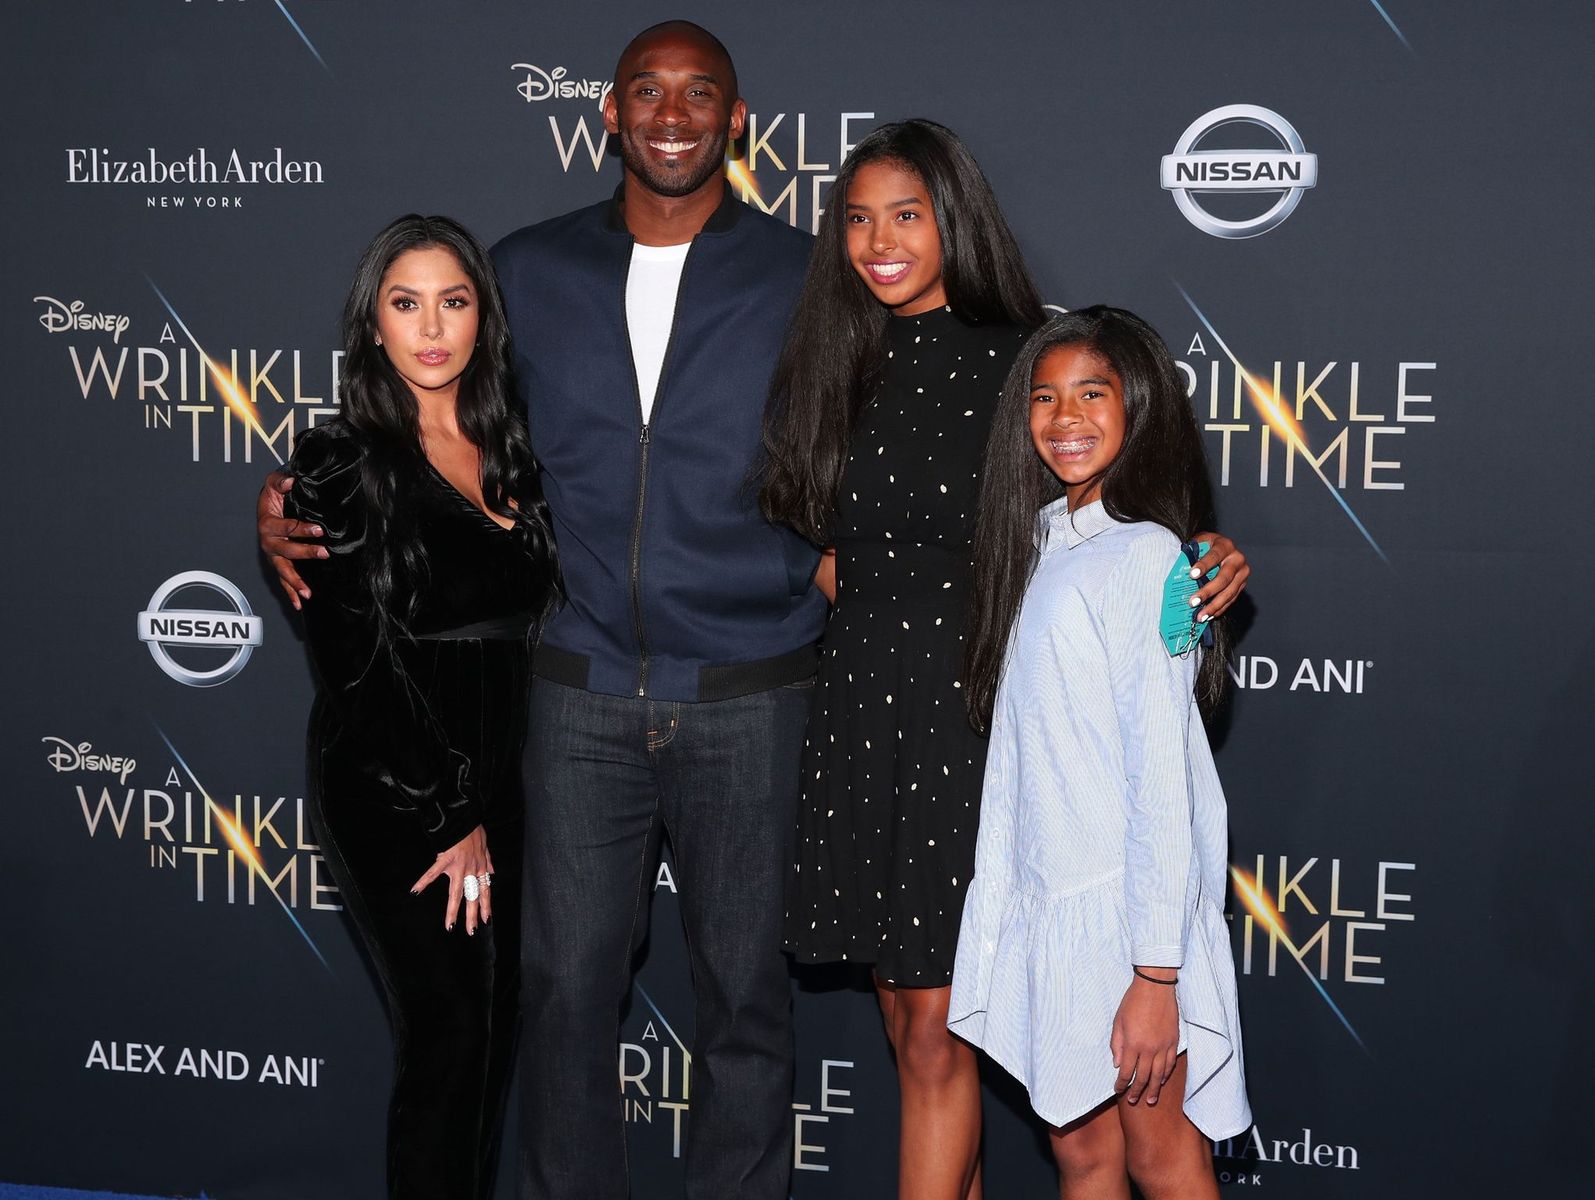 Vanessa and Kobe Bryant and their children at the premiere of "A Wrinkle In Time" on February 26, 2018. | Photo: Getty Images